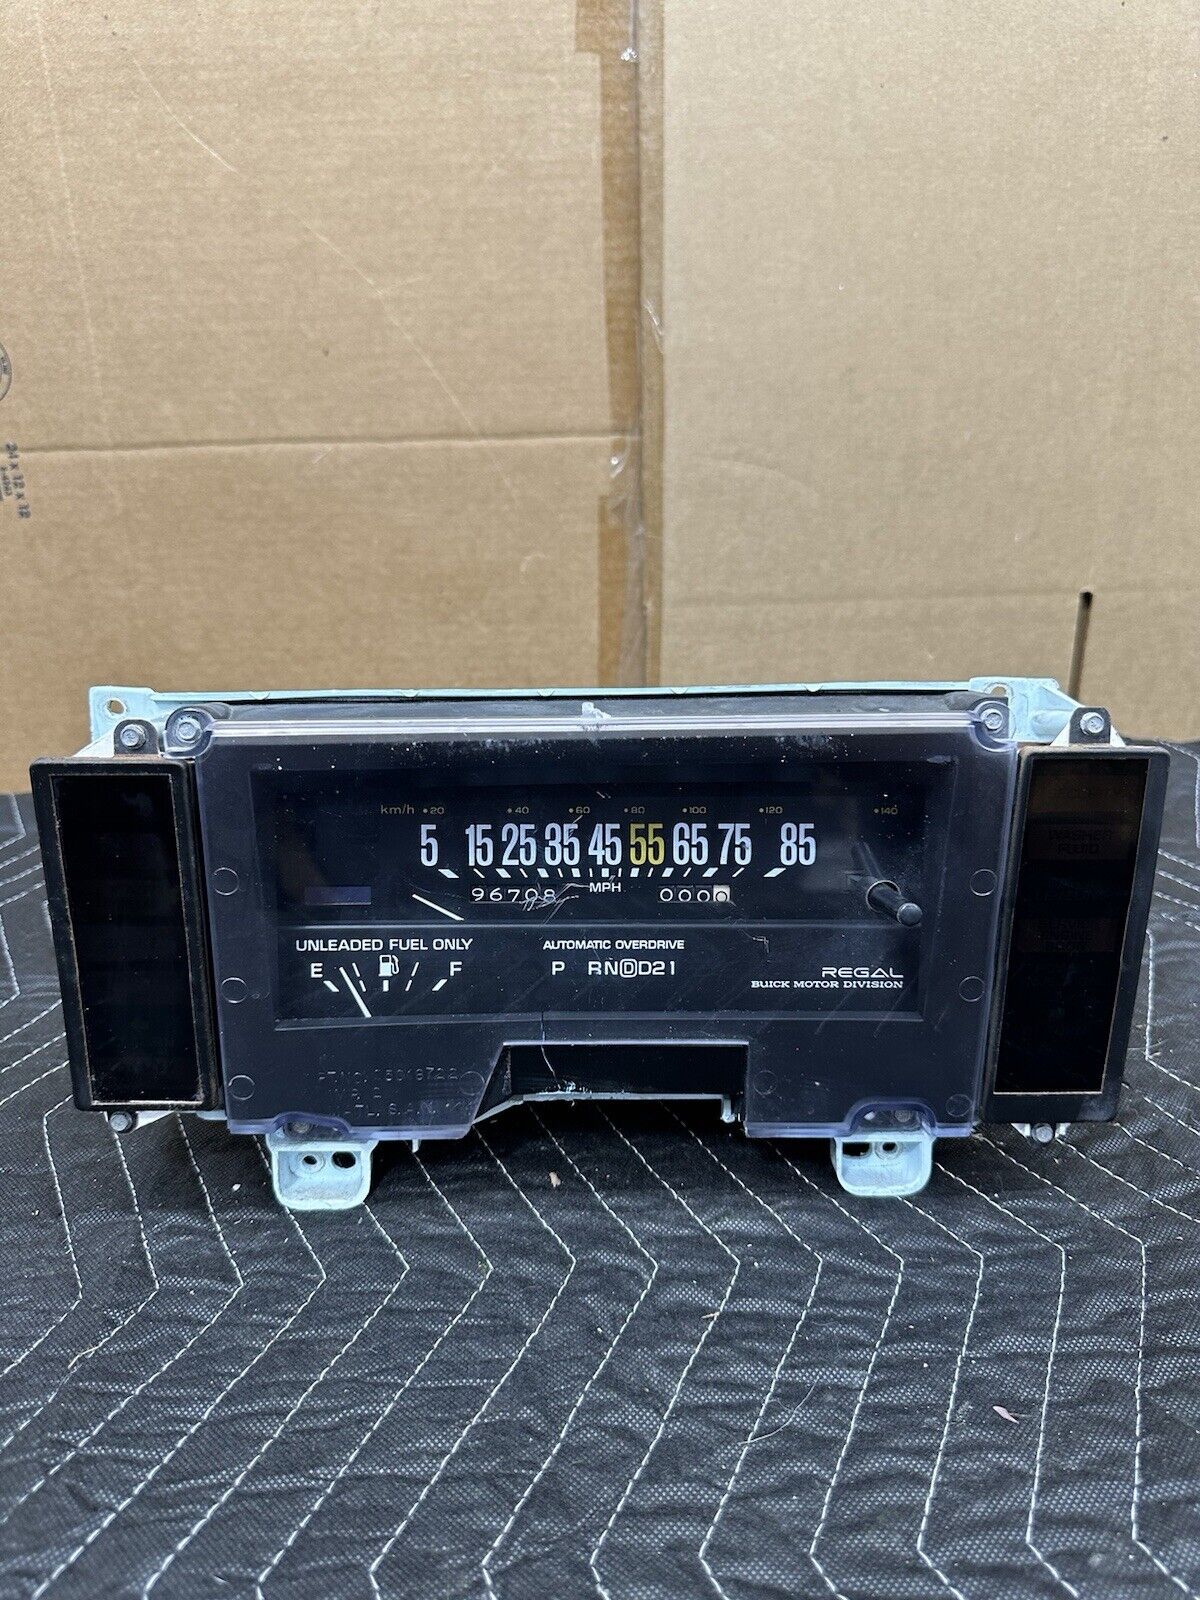 1984 1985 1986 1987 Buick Regal Factory Instrument Cluster